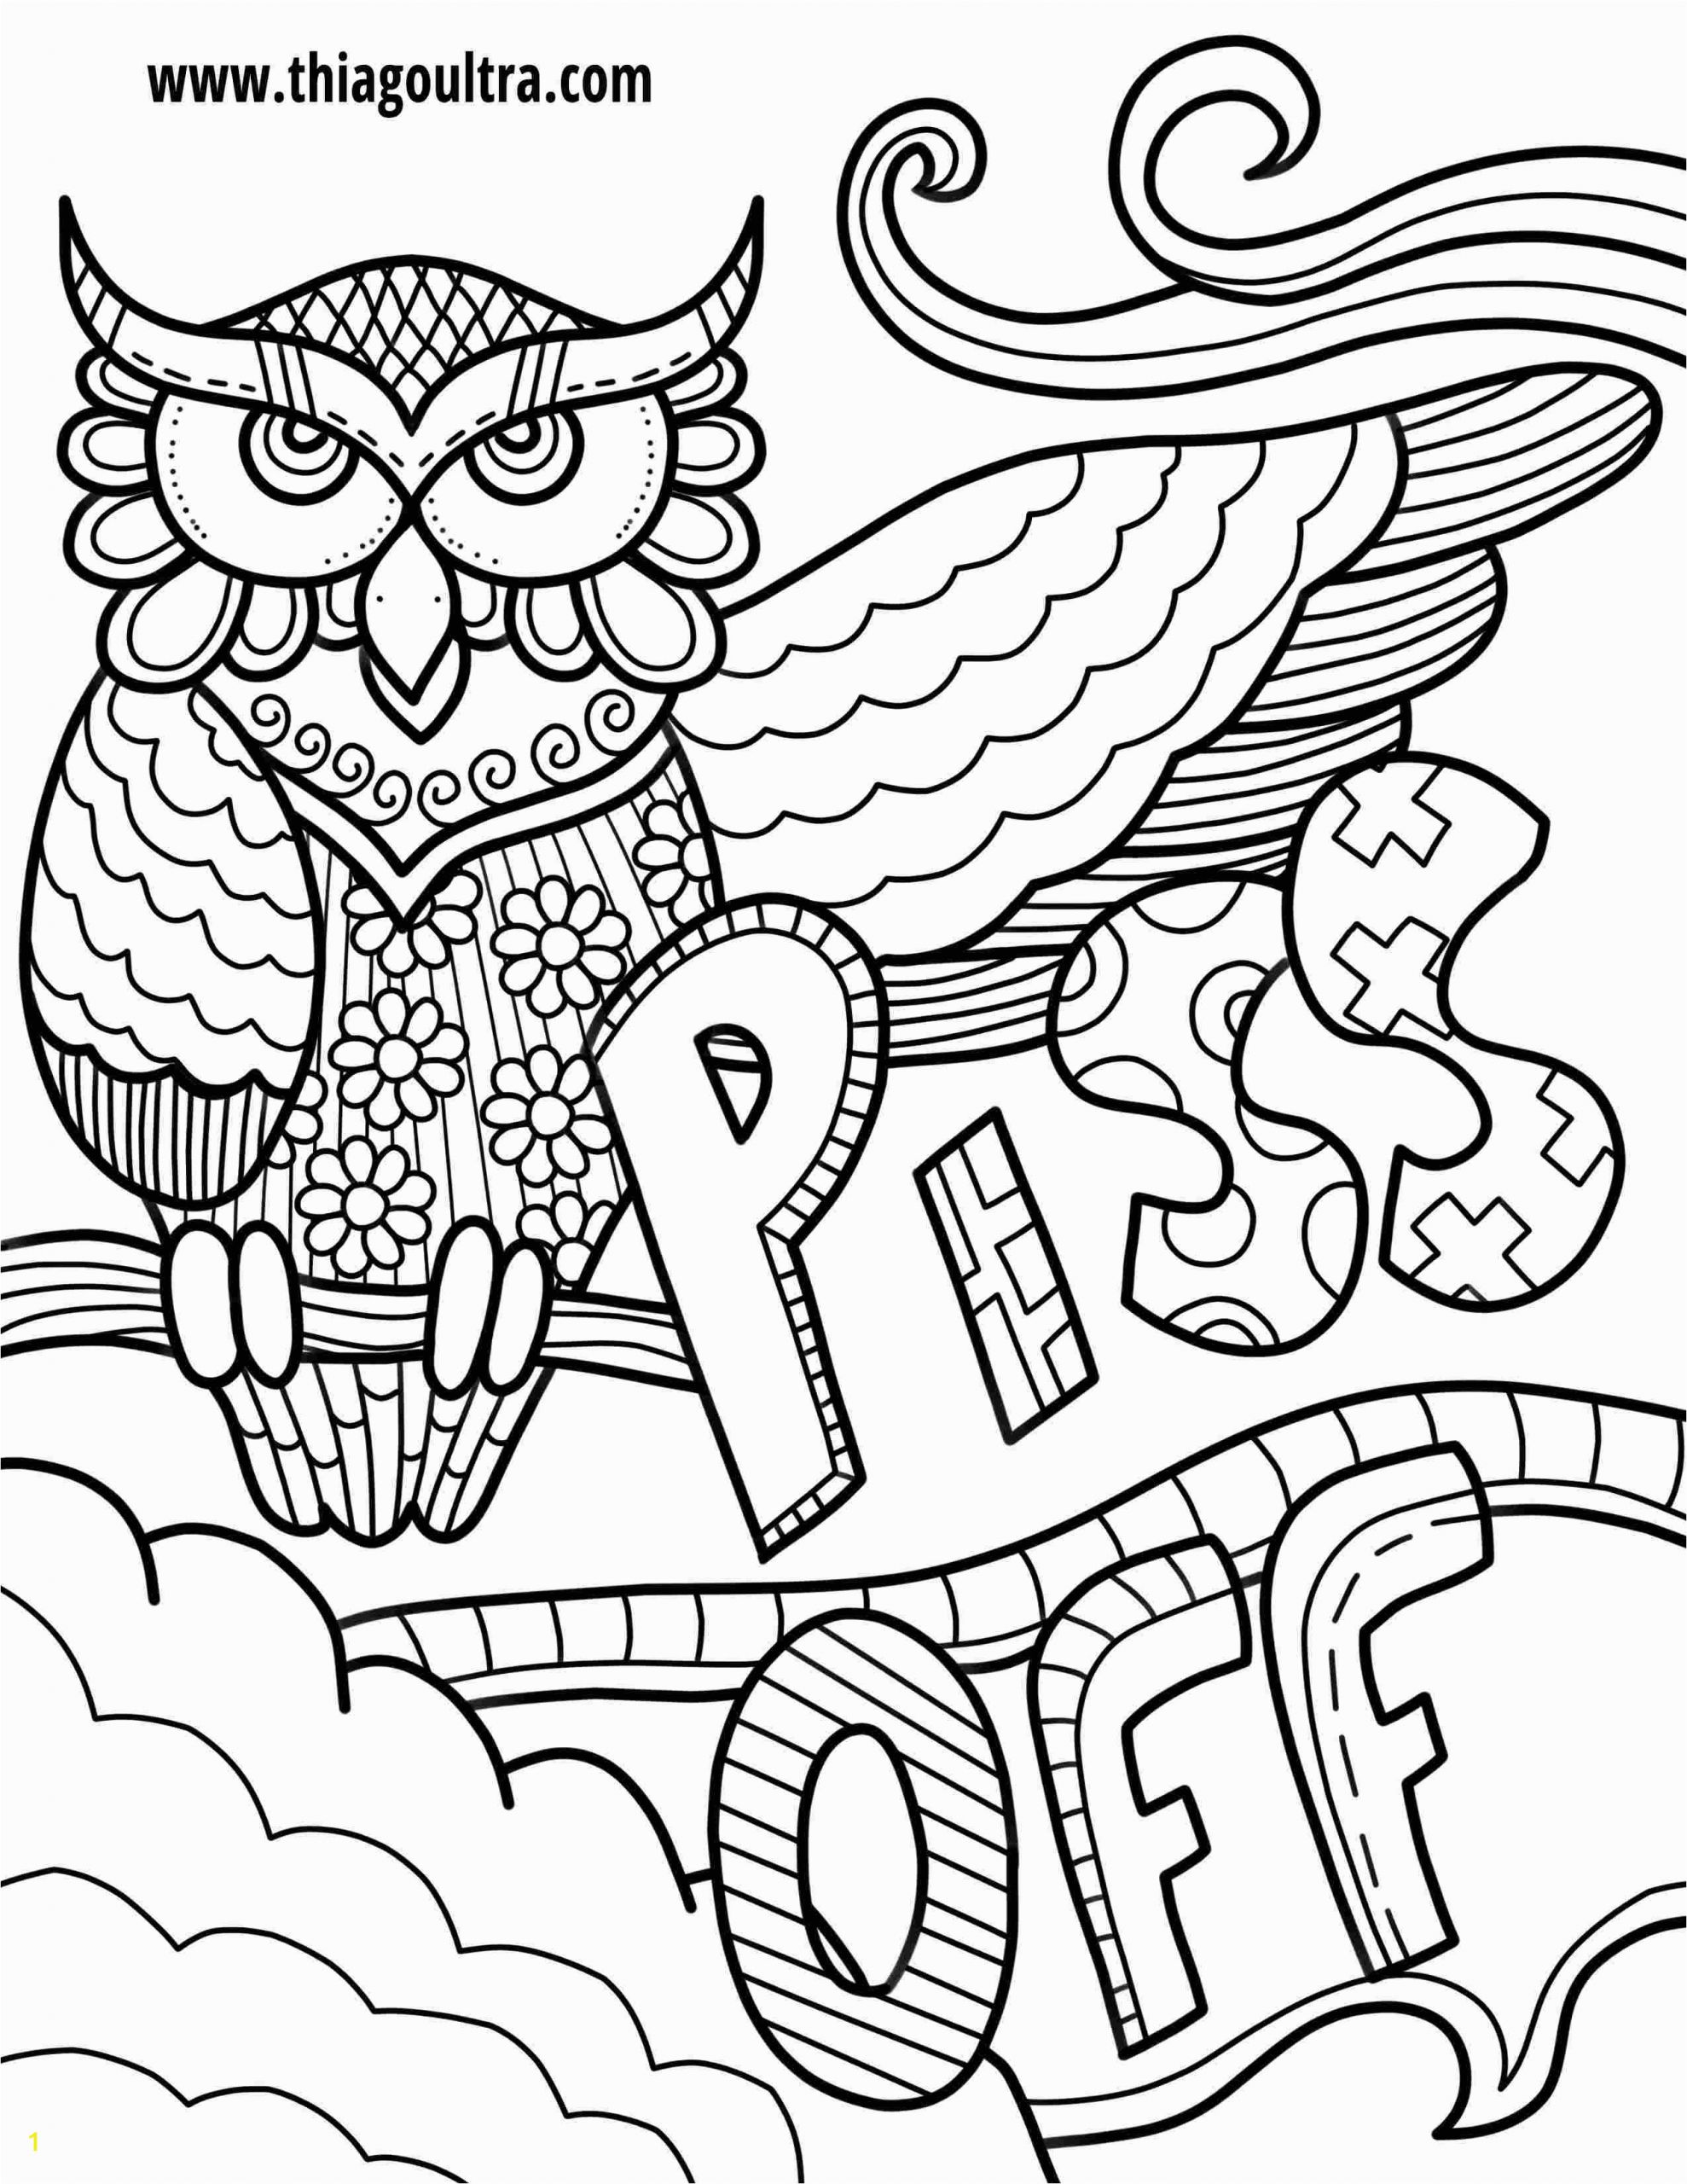 Download Free Printable Coloring Pages for Adults Only Swear Words ...